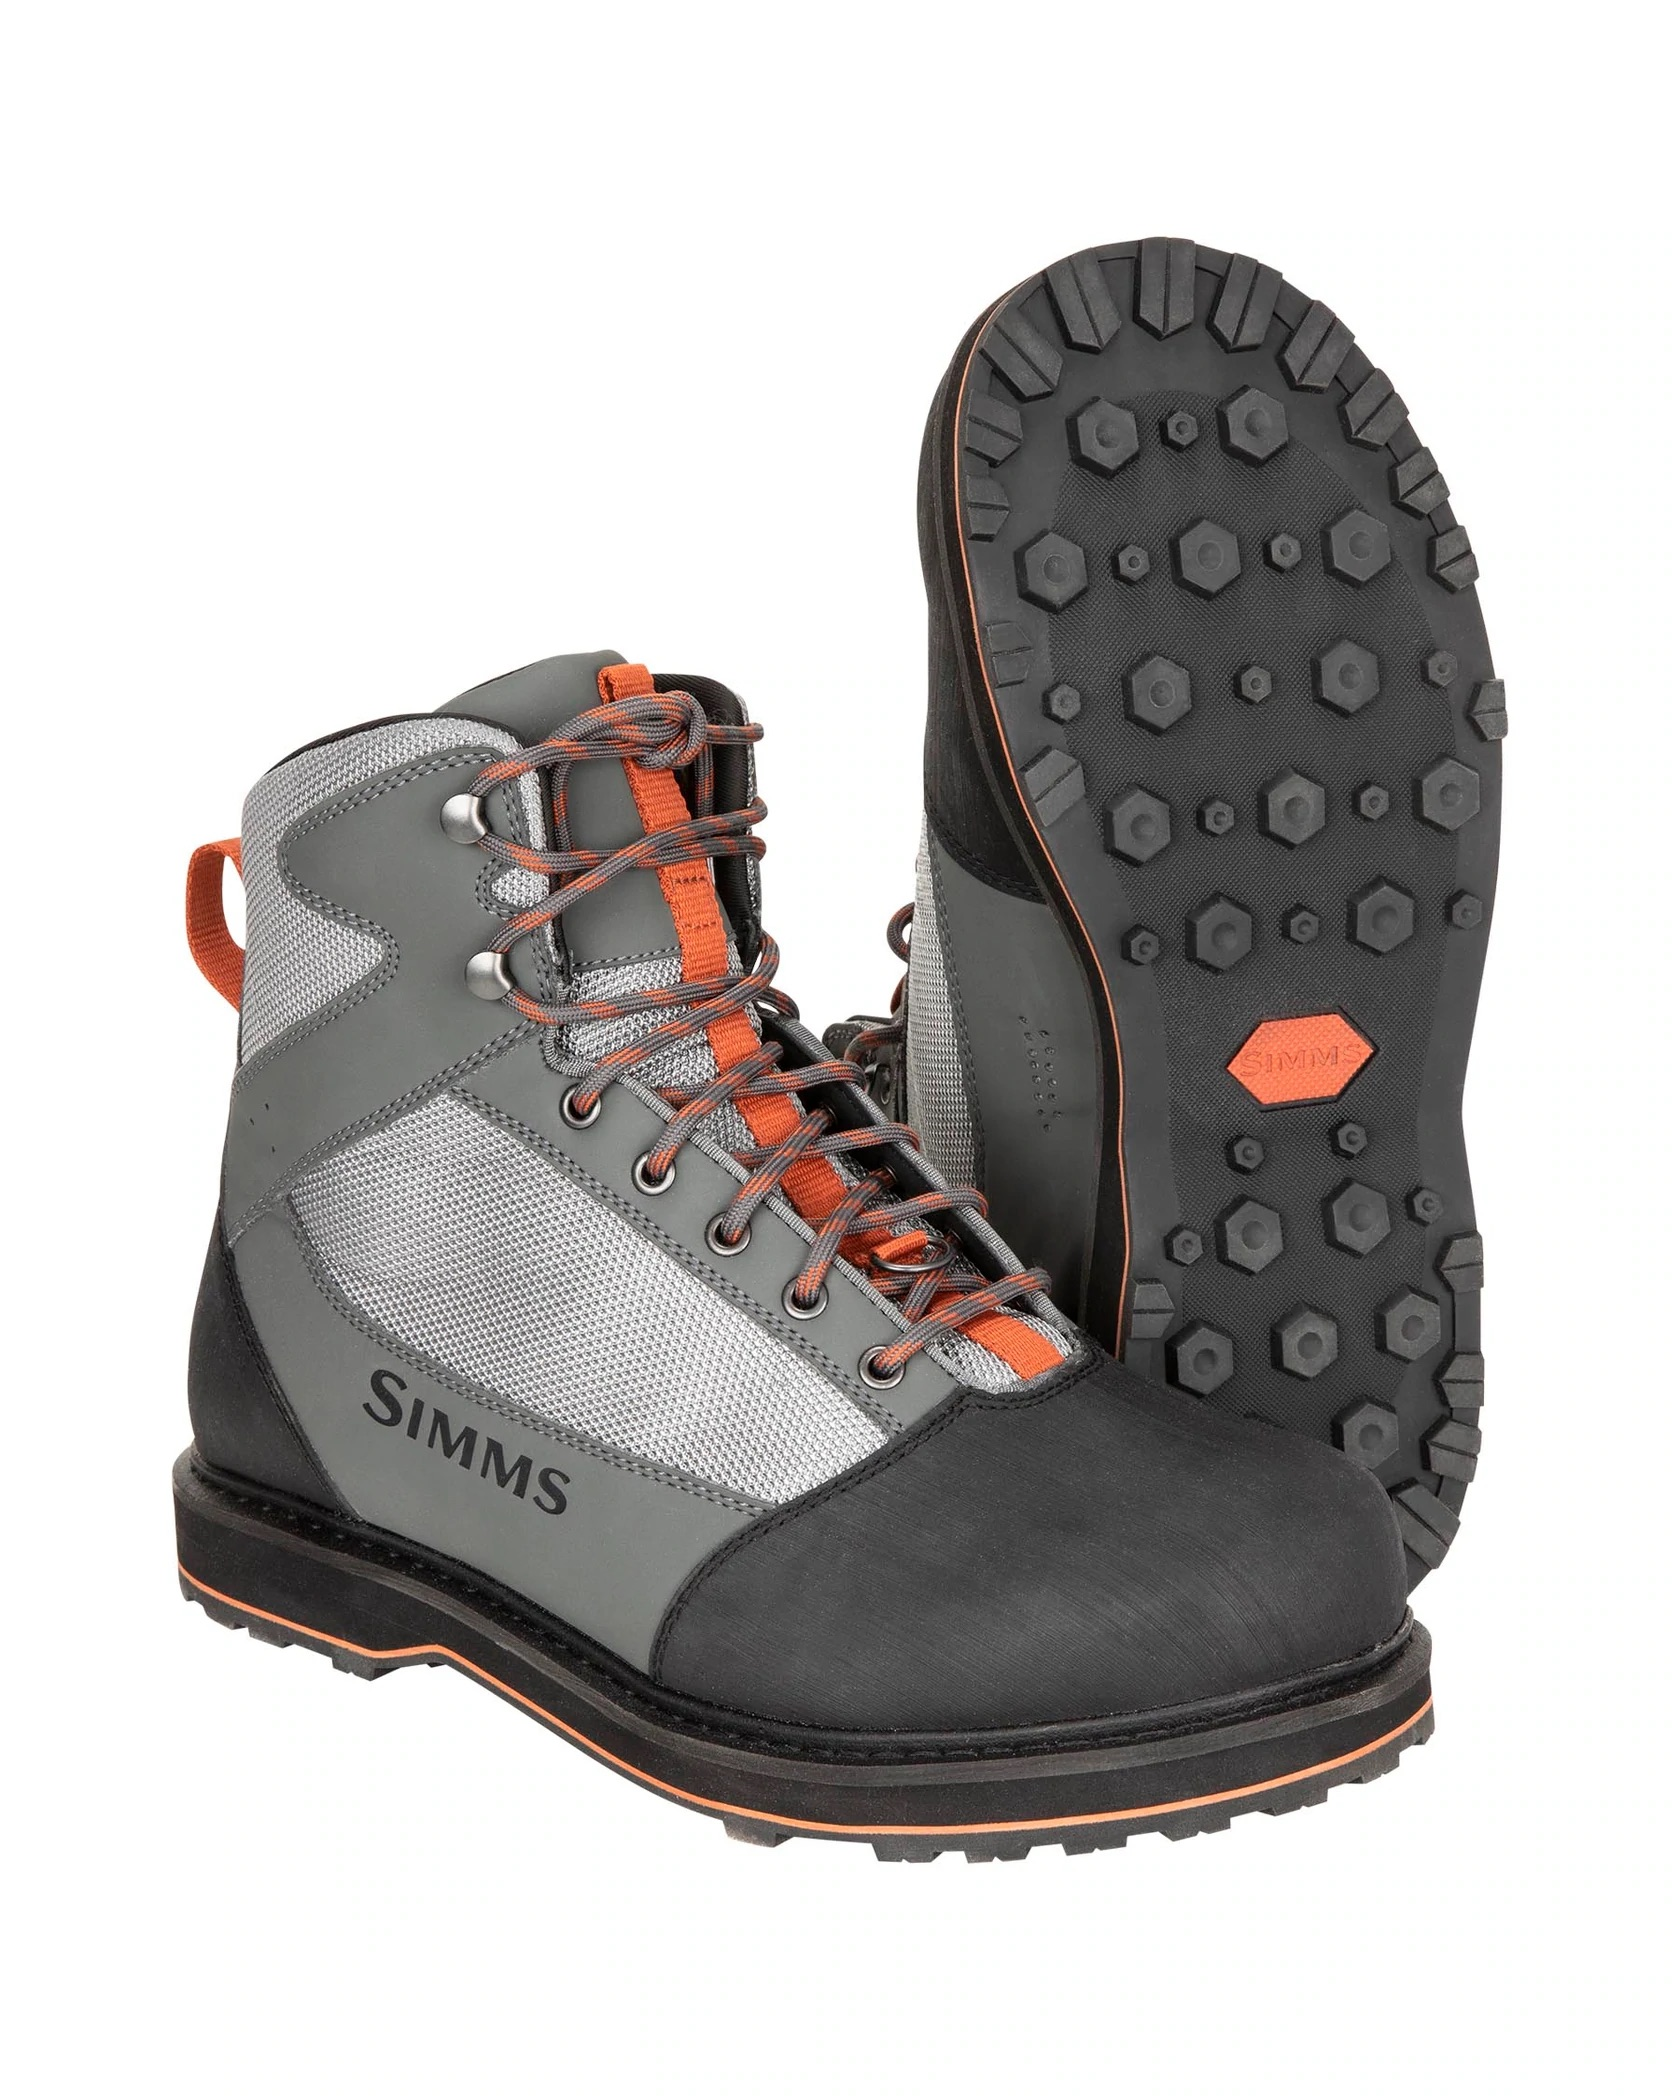 Simms Tributary Boot - Rubber - Size 10